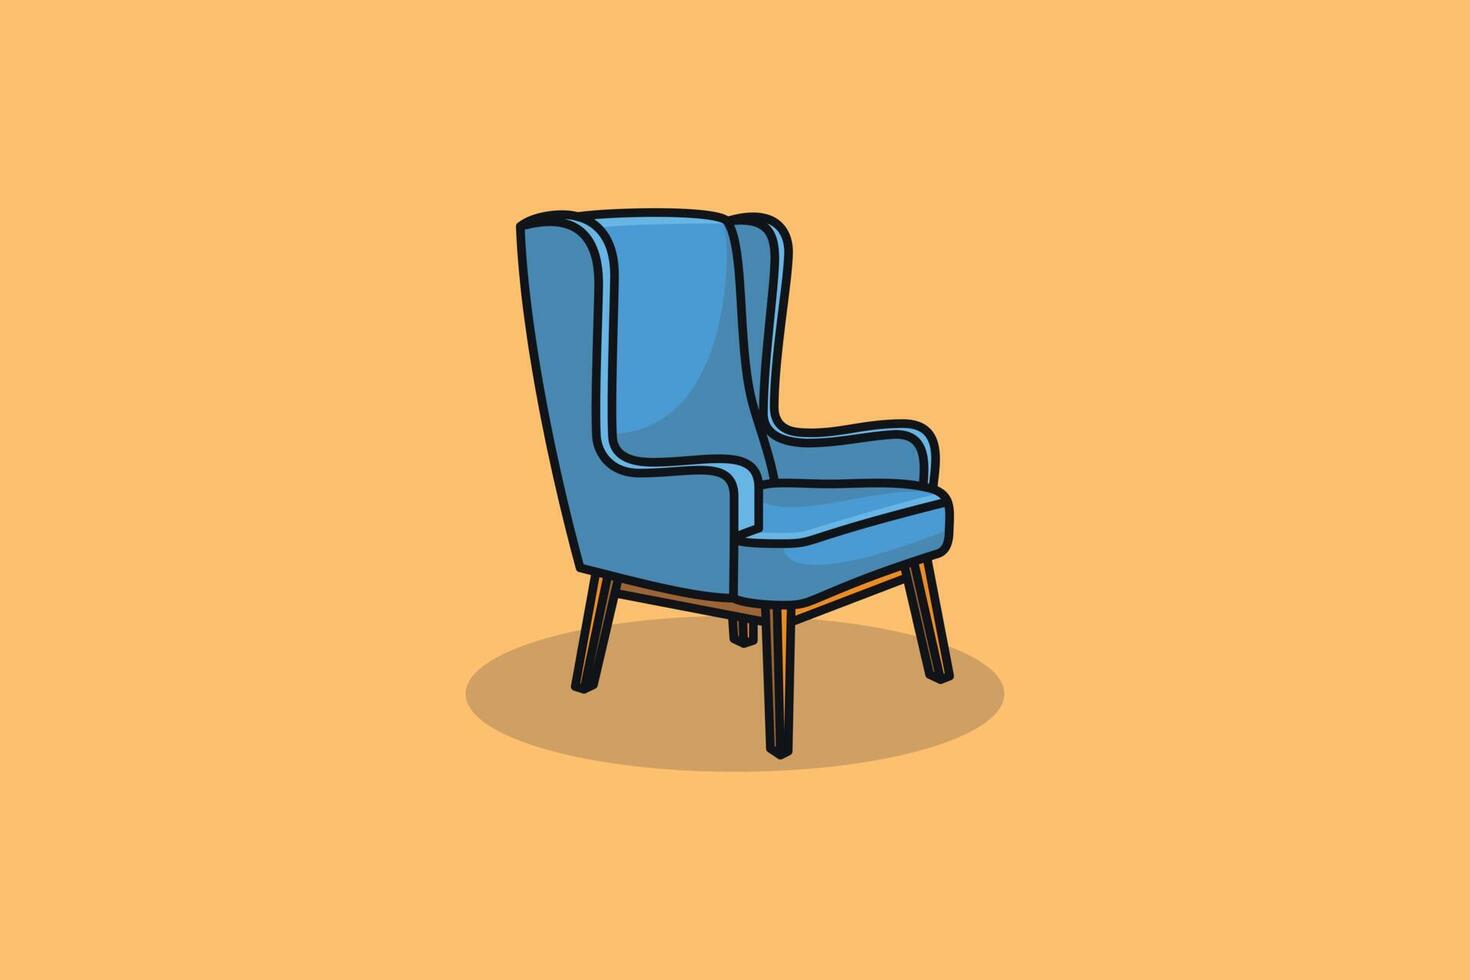 Modern Sofa Chair, Armchair vector illustration. Interior furniture object icon concept. Comfortable Sitting Sofa vector design with shadow on orange background. Comfortable office chair icon design.